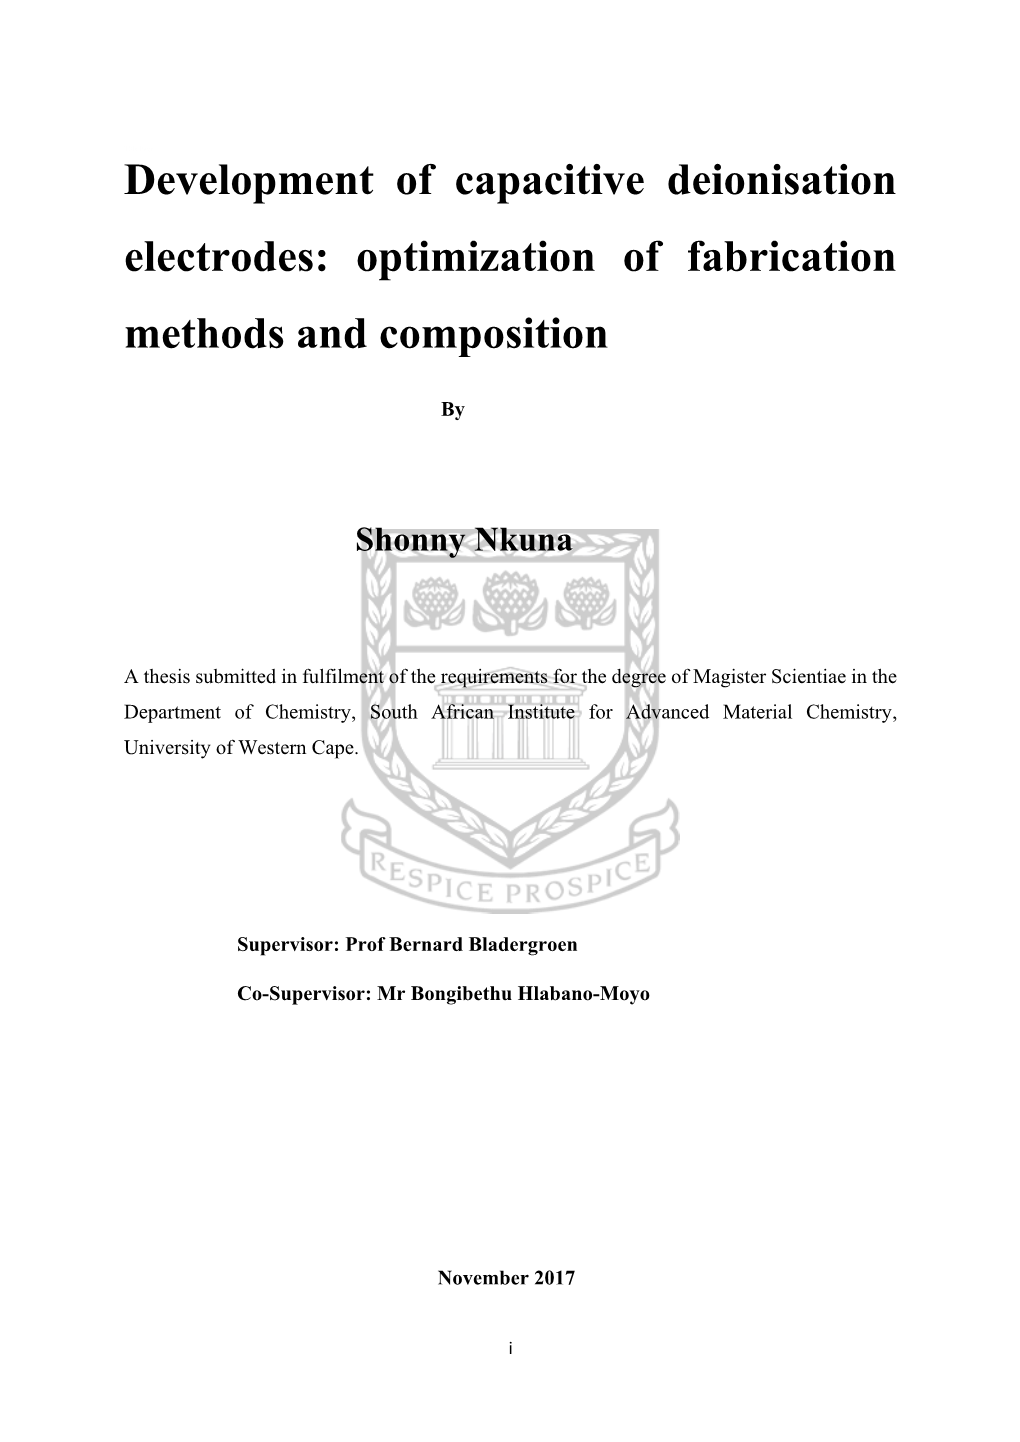 Development of Capacitive Deionisation Electrodes: Optimization of Fabrication Methods and Composition